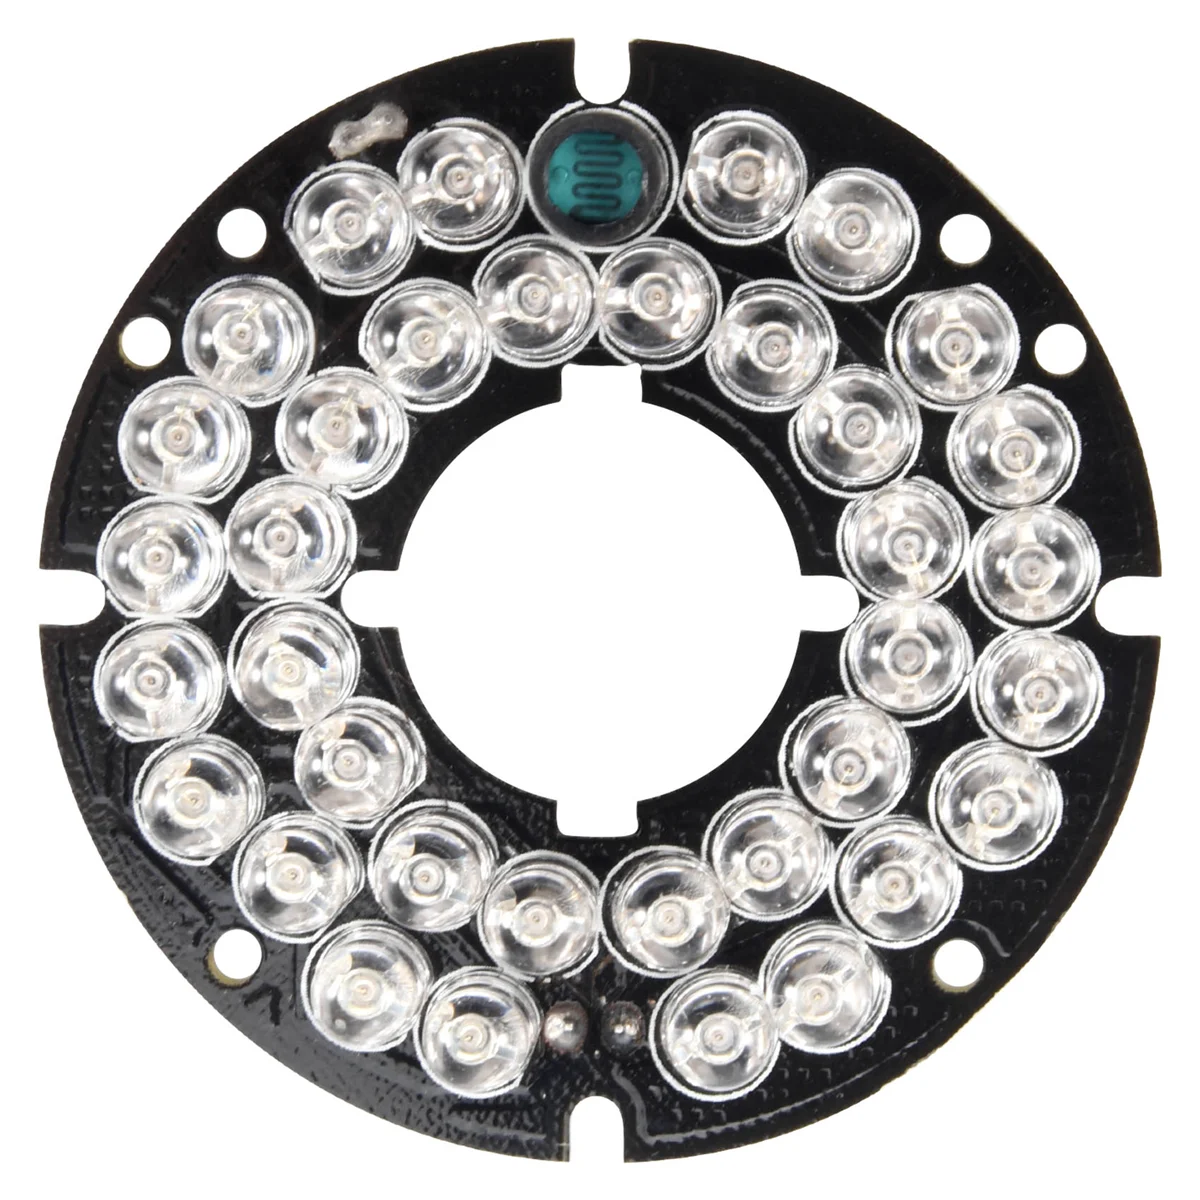 

Infrared IR 36 Led Illuminator Board Plate for CCTV CCD Security Camera